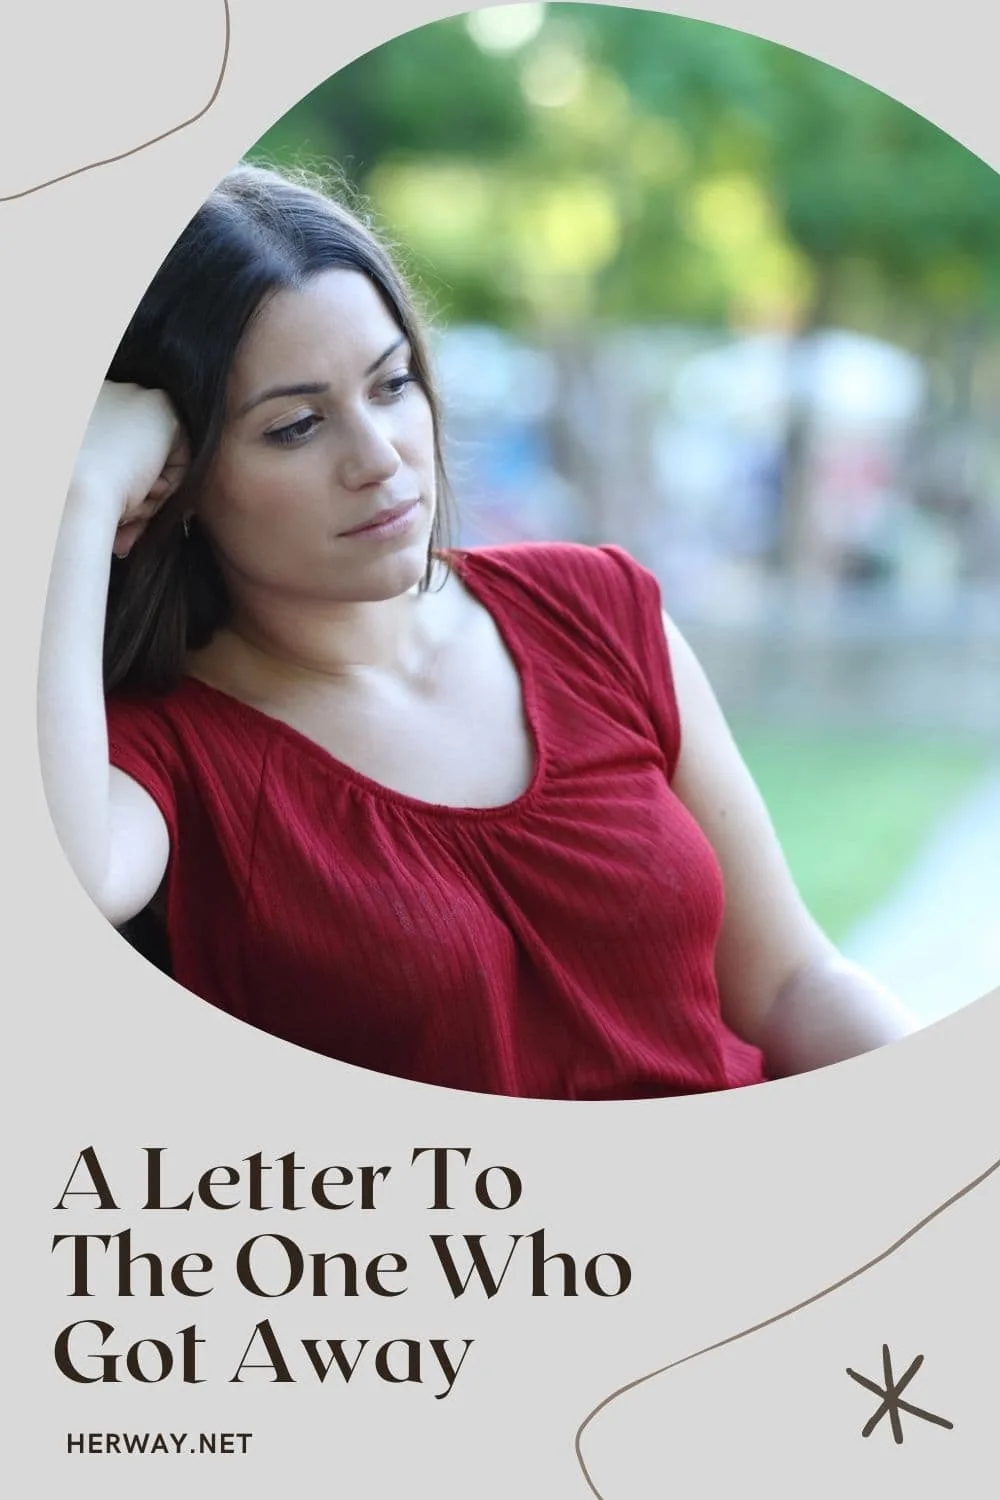 A Letter To The One Who Got Away